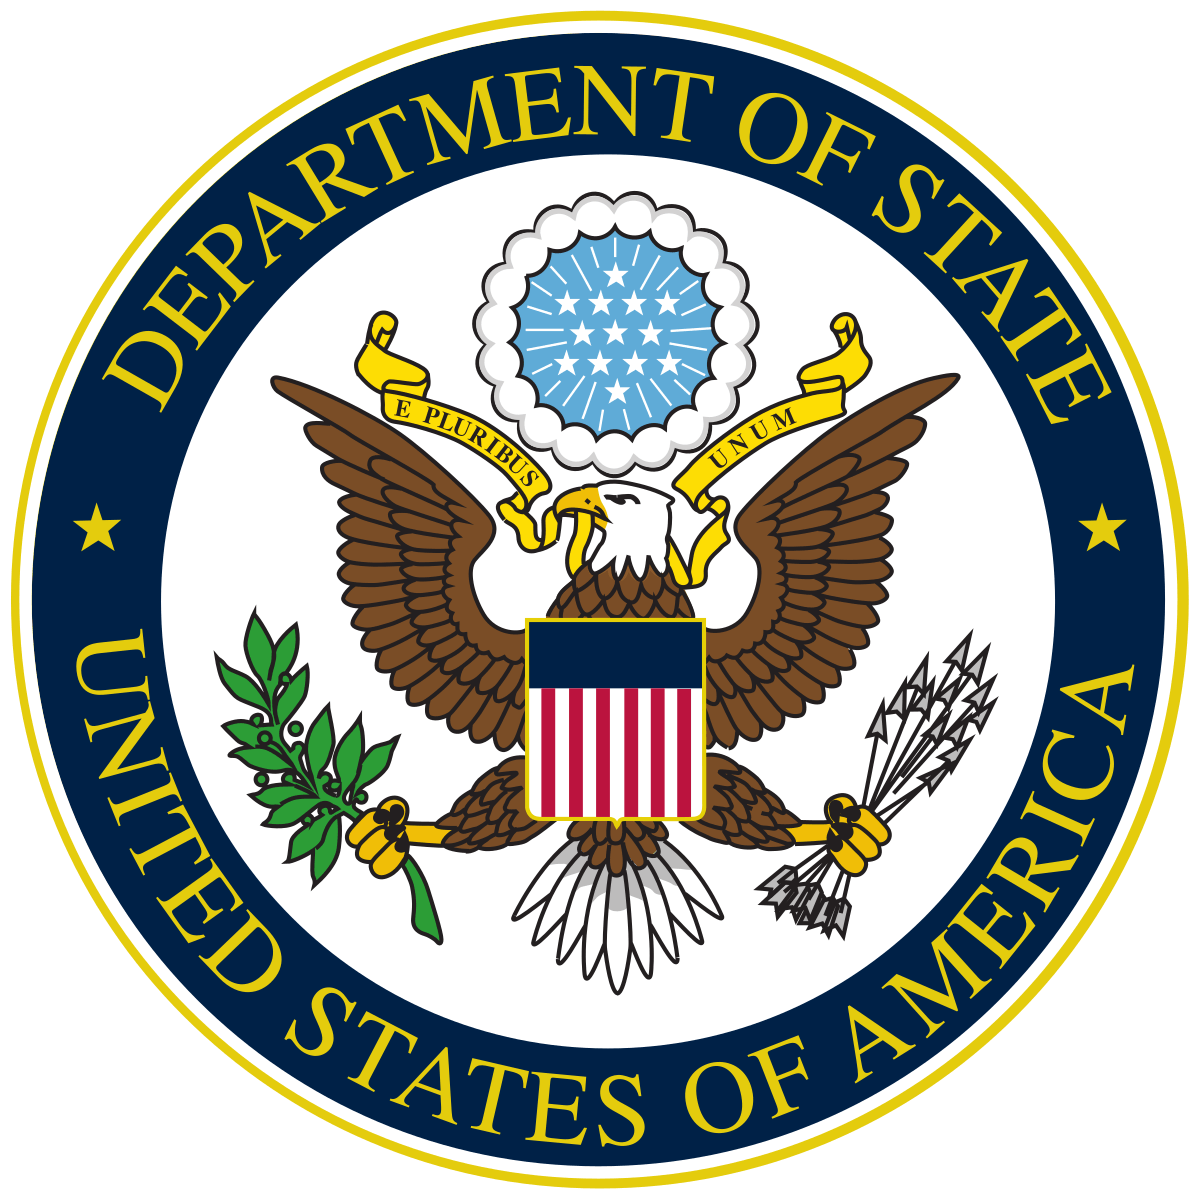 The Department Logo - United States Department of State